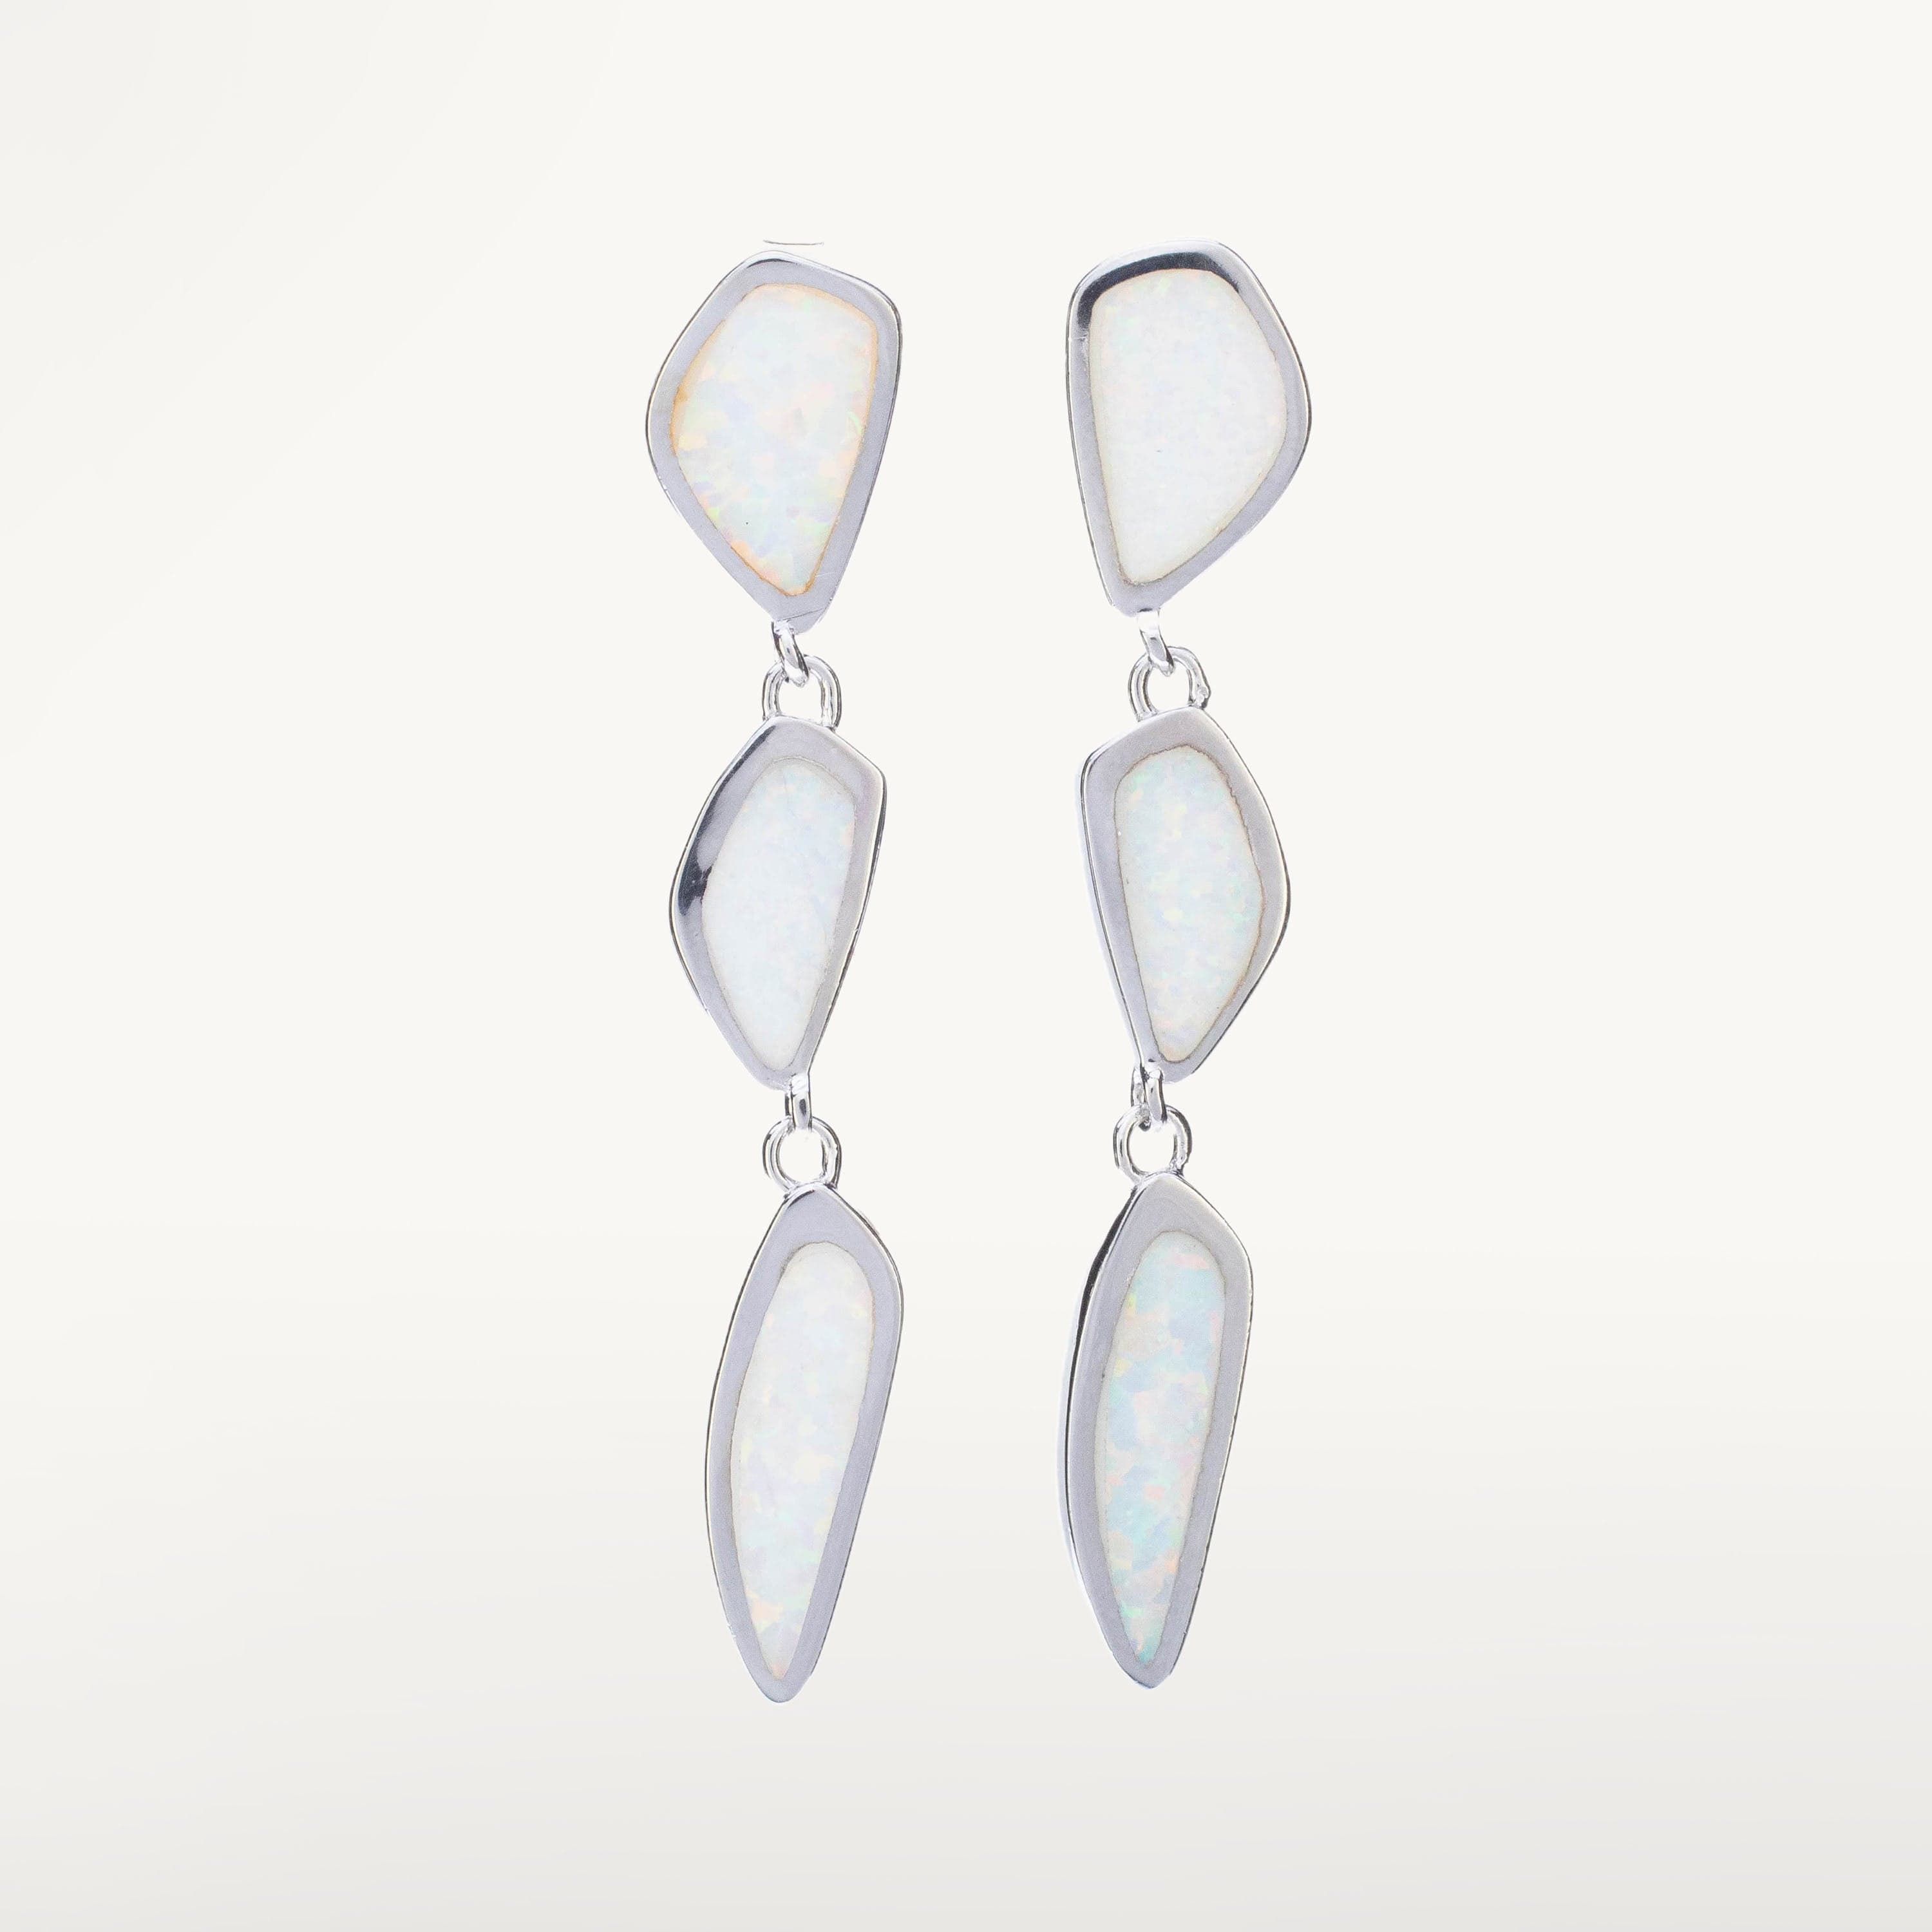 Kalifano Sterling Silver Opalite White Opal 925 Sterling Silver Dangly Earrings with Stud Backing OPLE-22200-WO